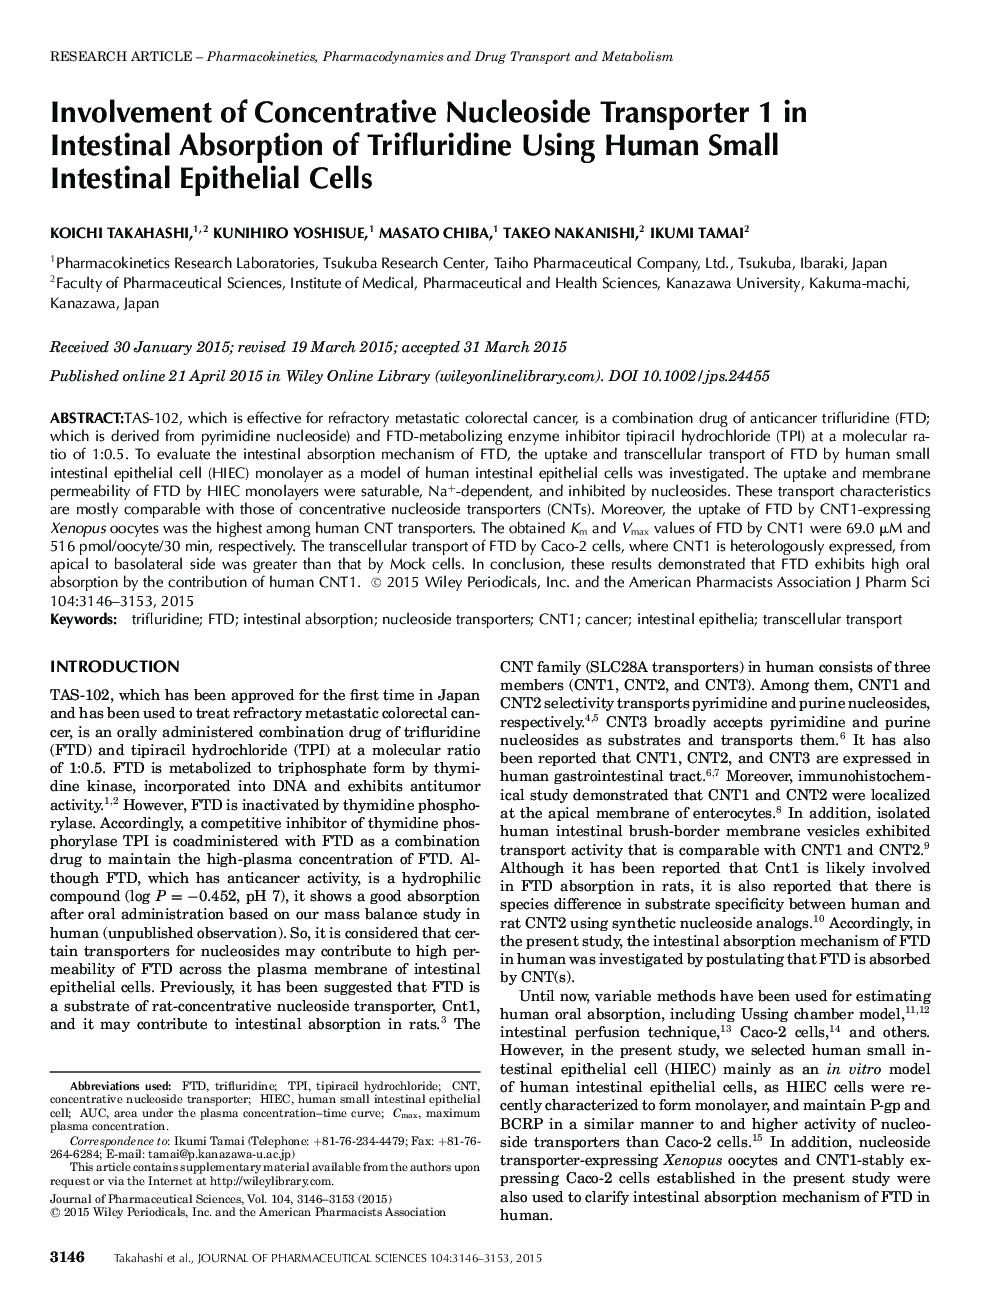 Involvement of Concentrative Nucleoside Transporter 1 in Intestinal Absorption of Trifluridine Using Human Small Intestinal Epithelial Cells